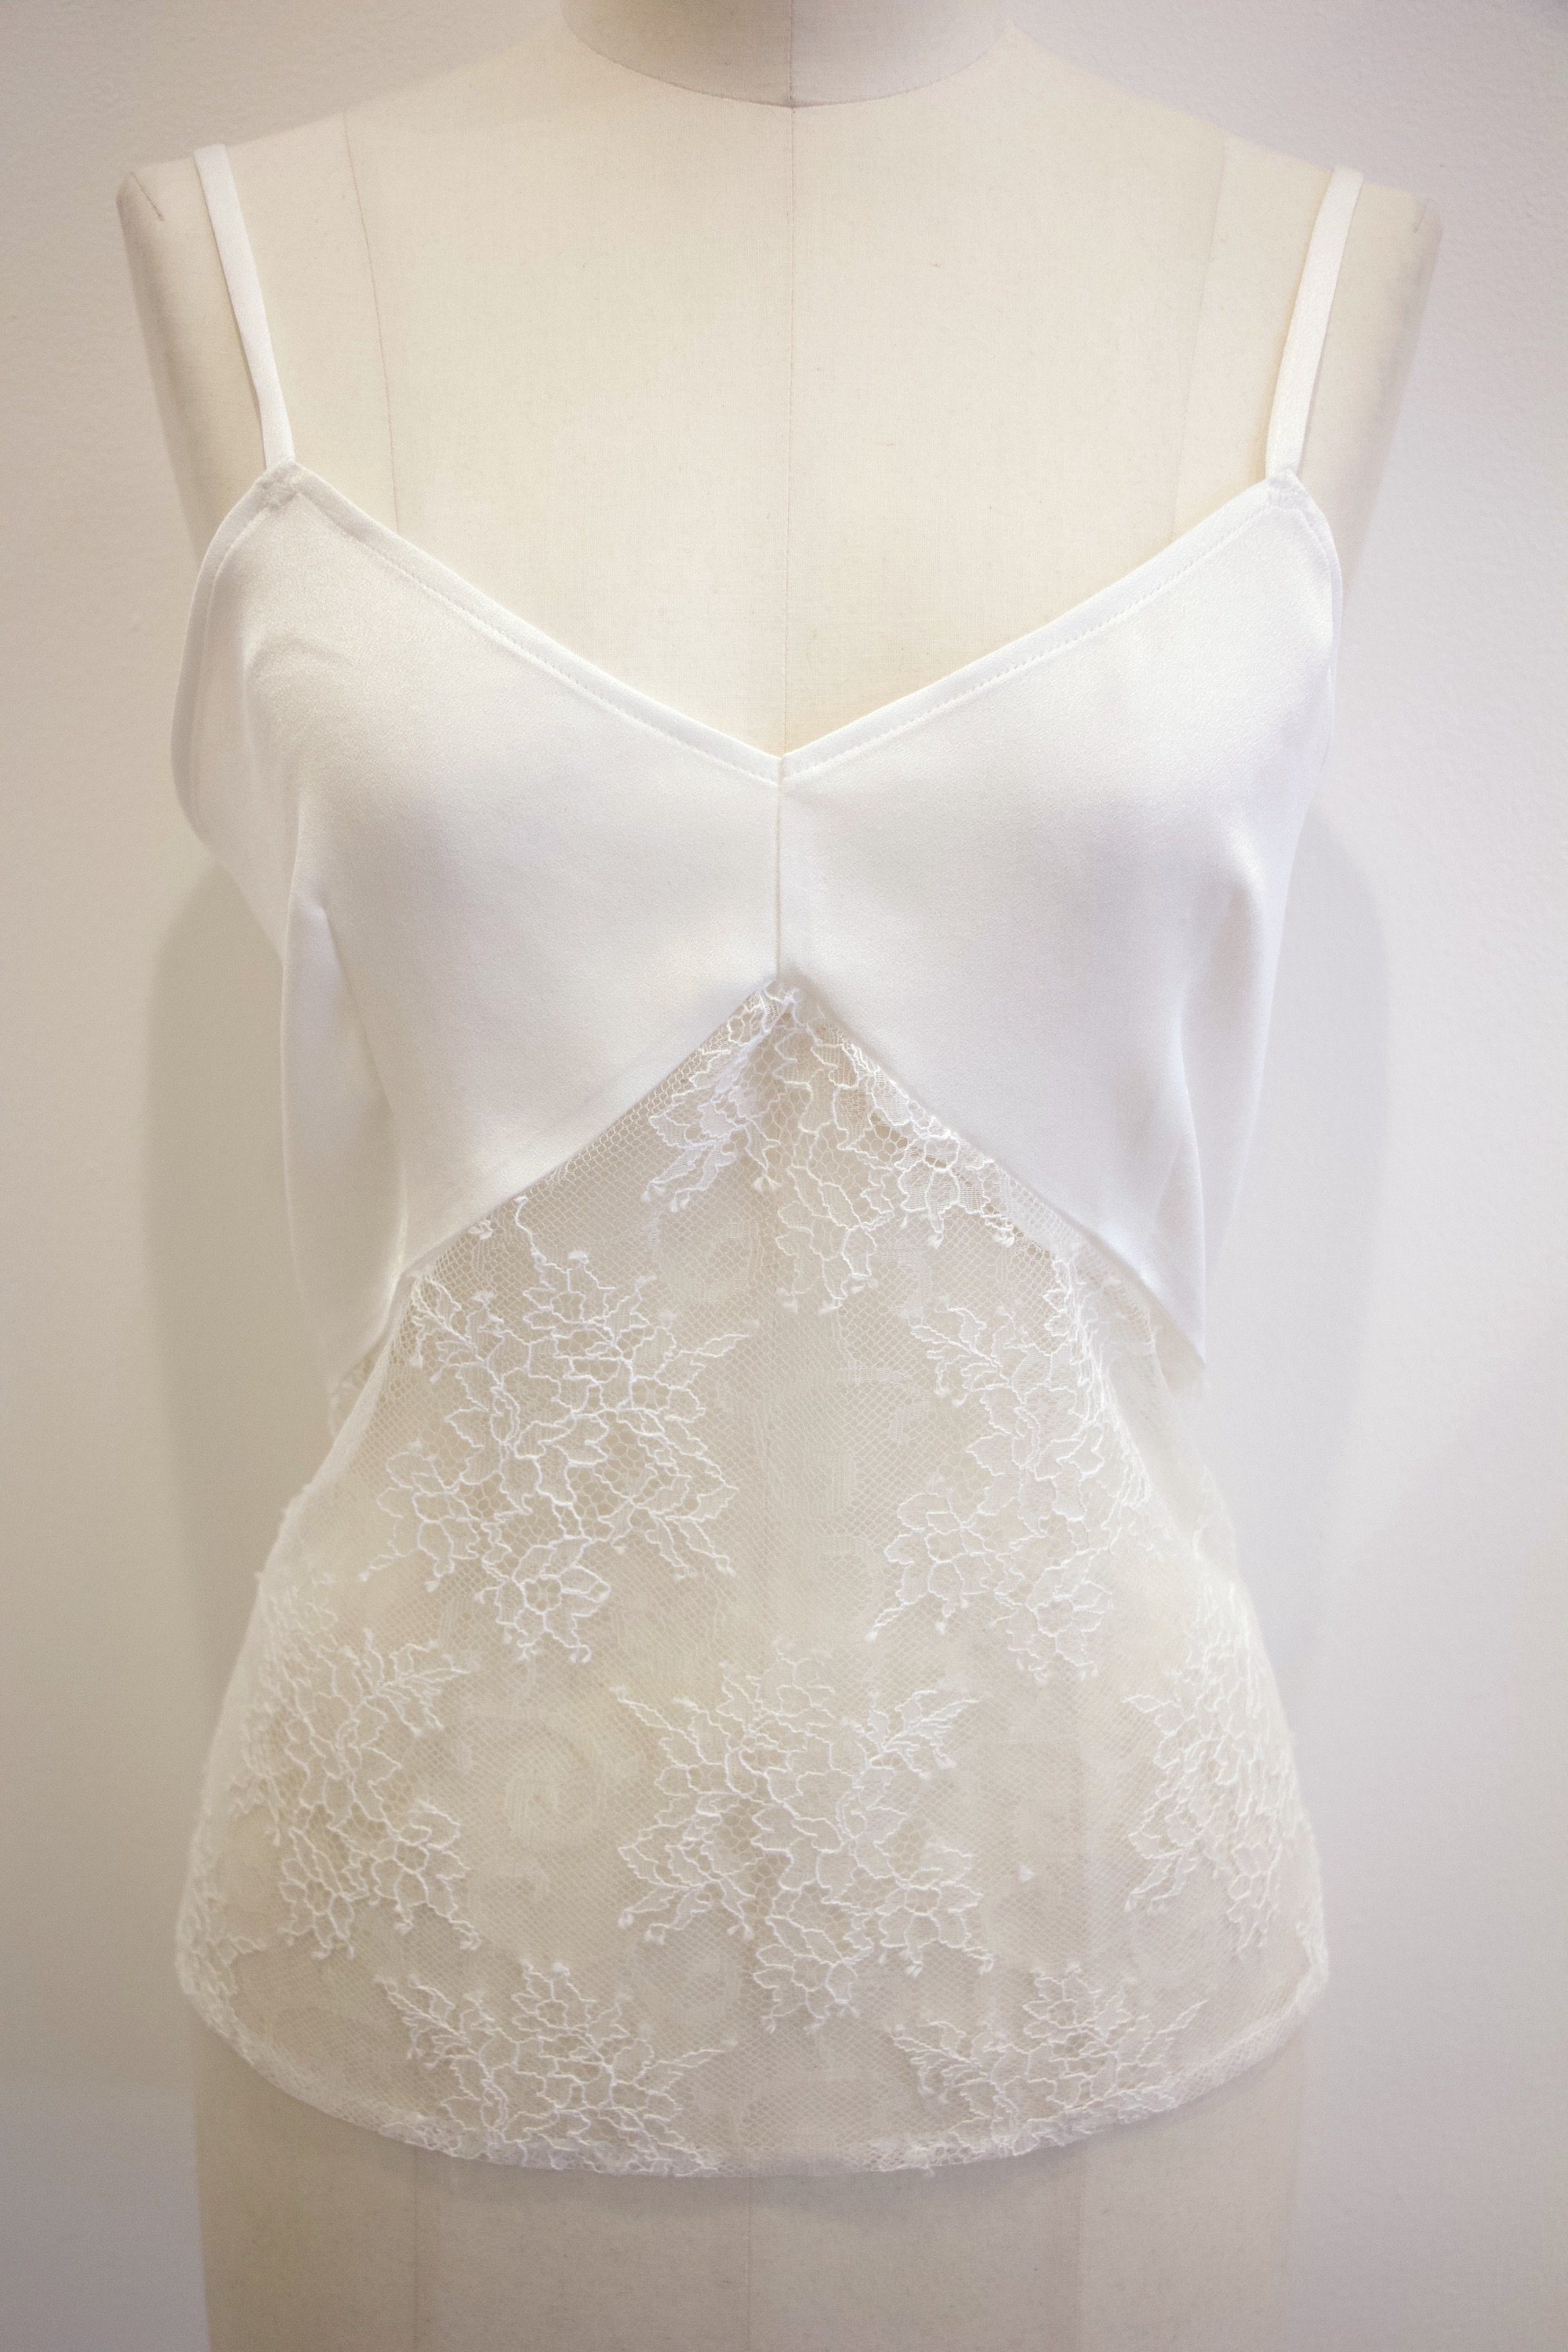 <img class='new_mark_img1' src='https://img.shop-pro.jp/img/new/icons55.gif' style='border:none;display:inline;margin:0px;padding:0px;width:auto;' />f's6 Lace satin camisole / White